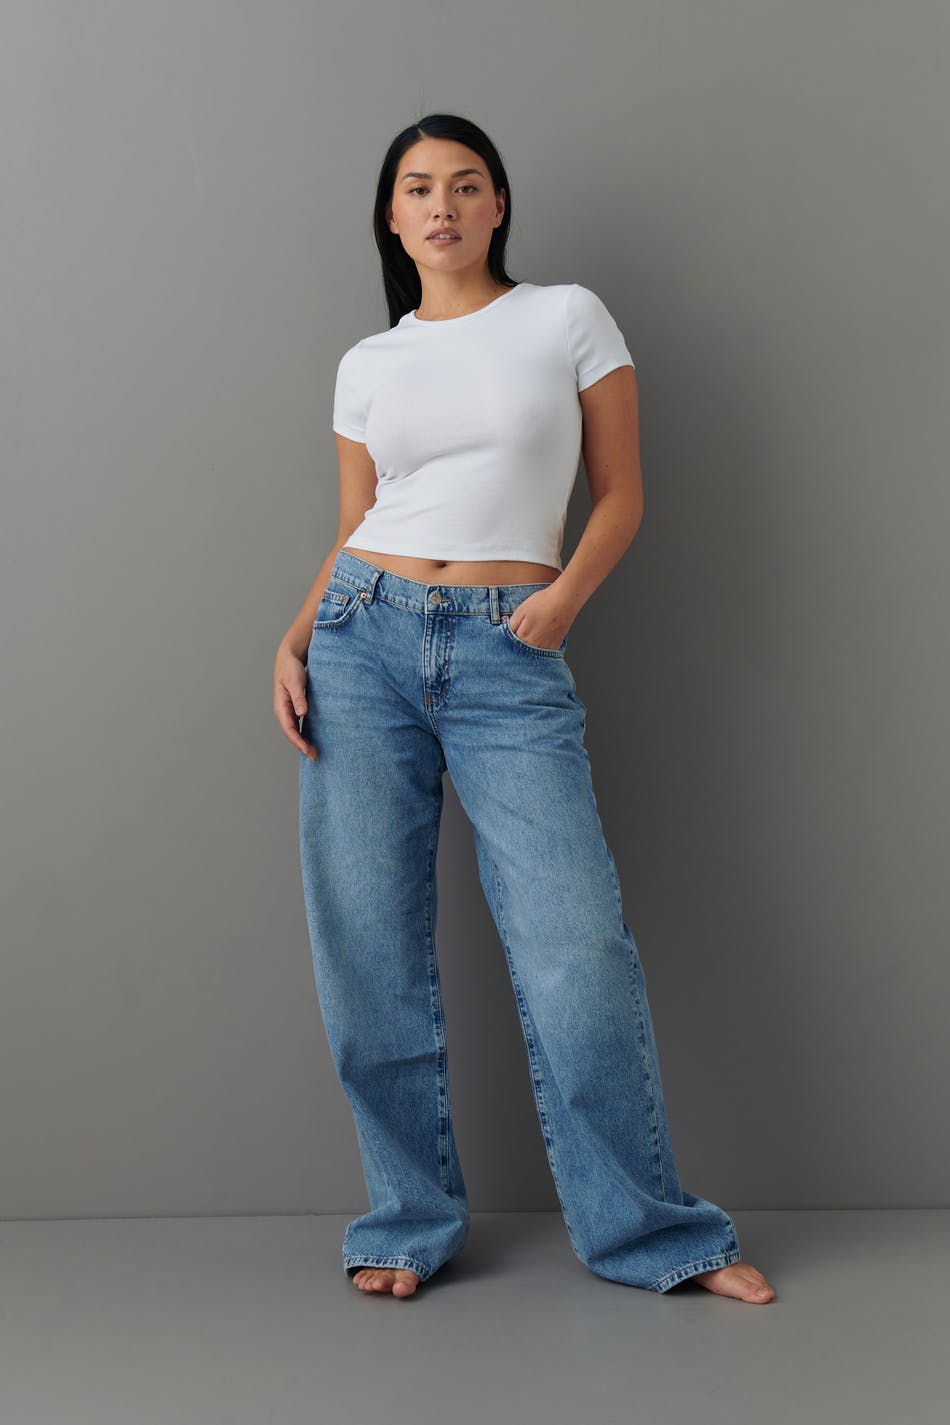 High Rise Jeans for Women, Womens High Rise Jeans